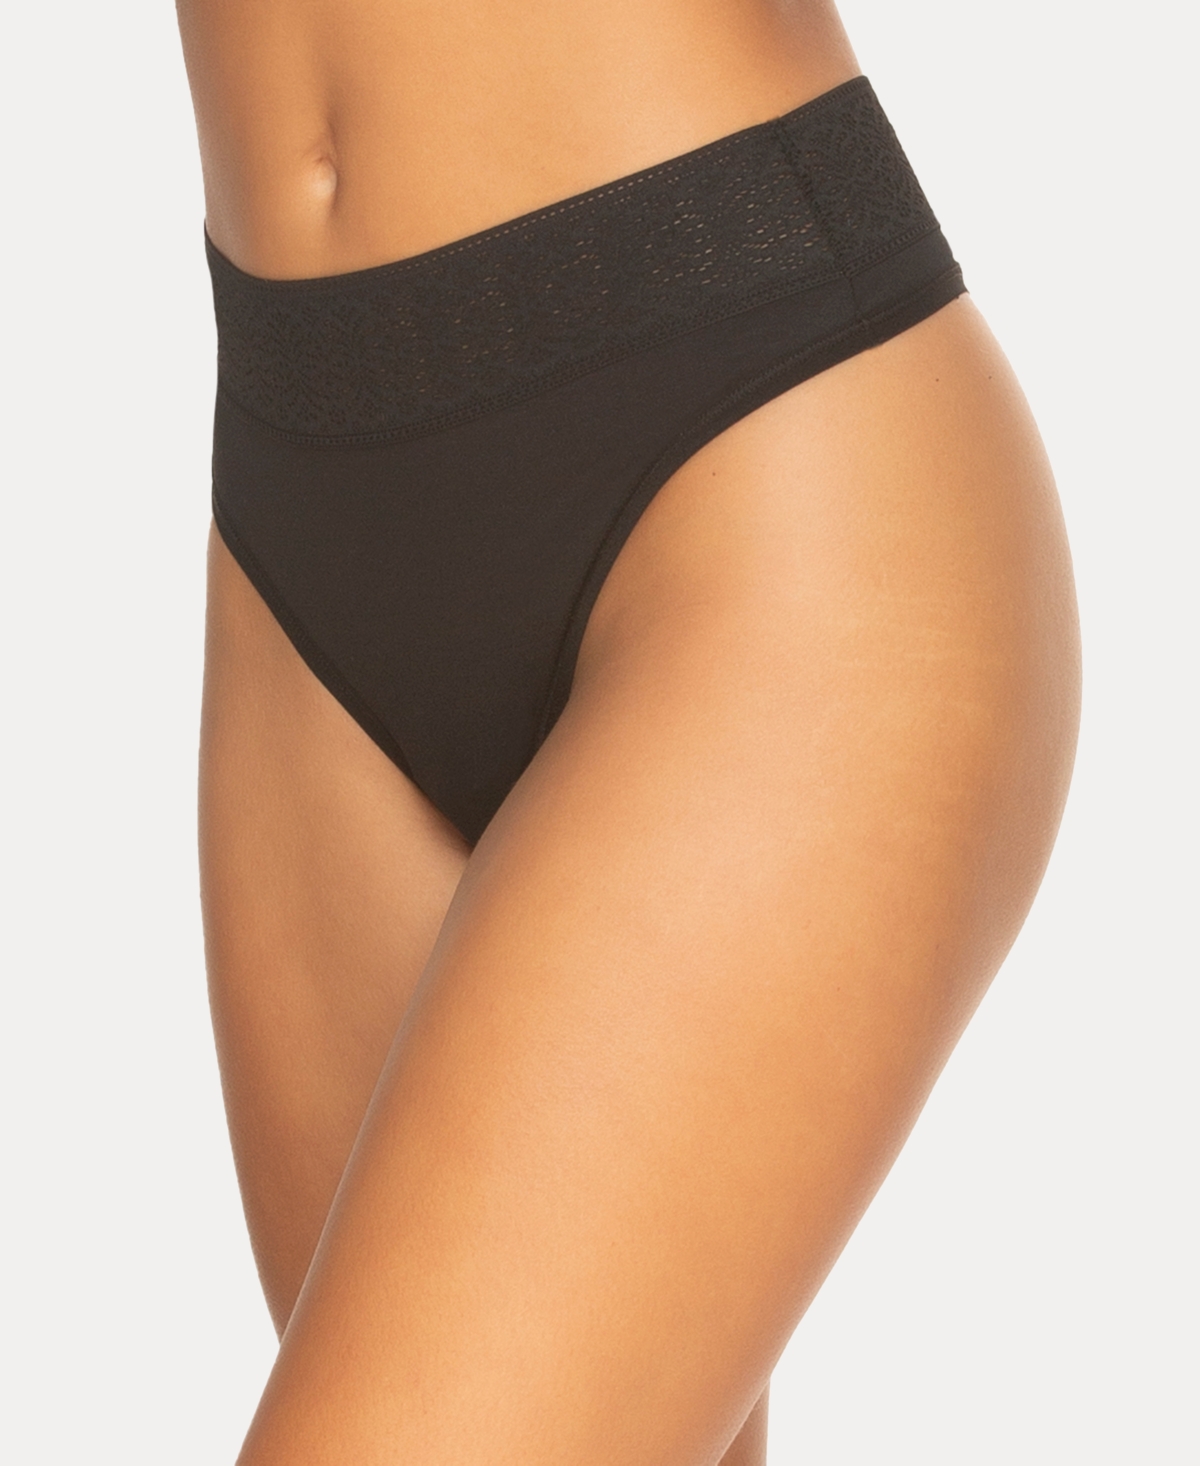 Women's Serene Modal and Lace Thong Underwear - Black